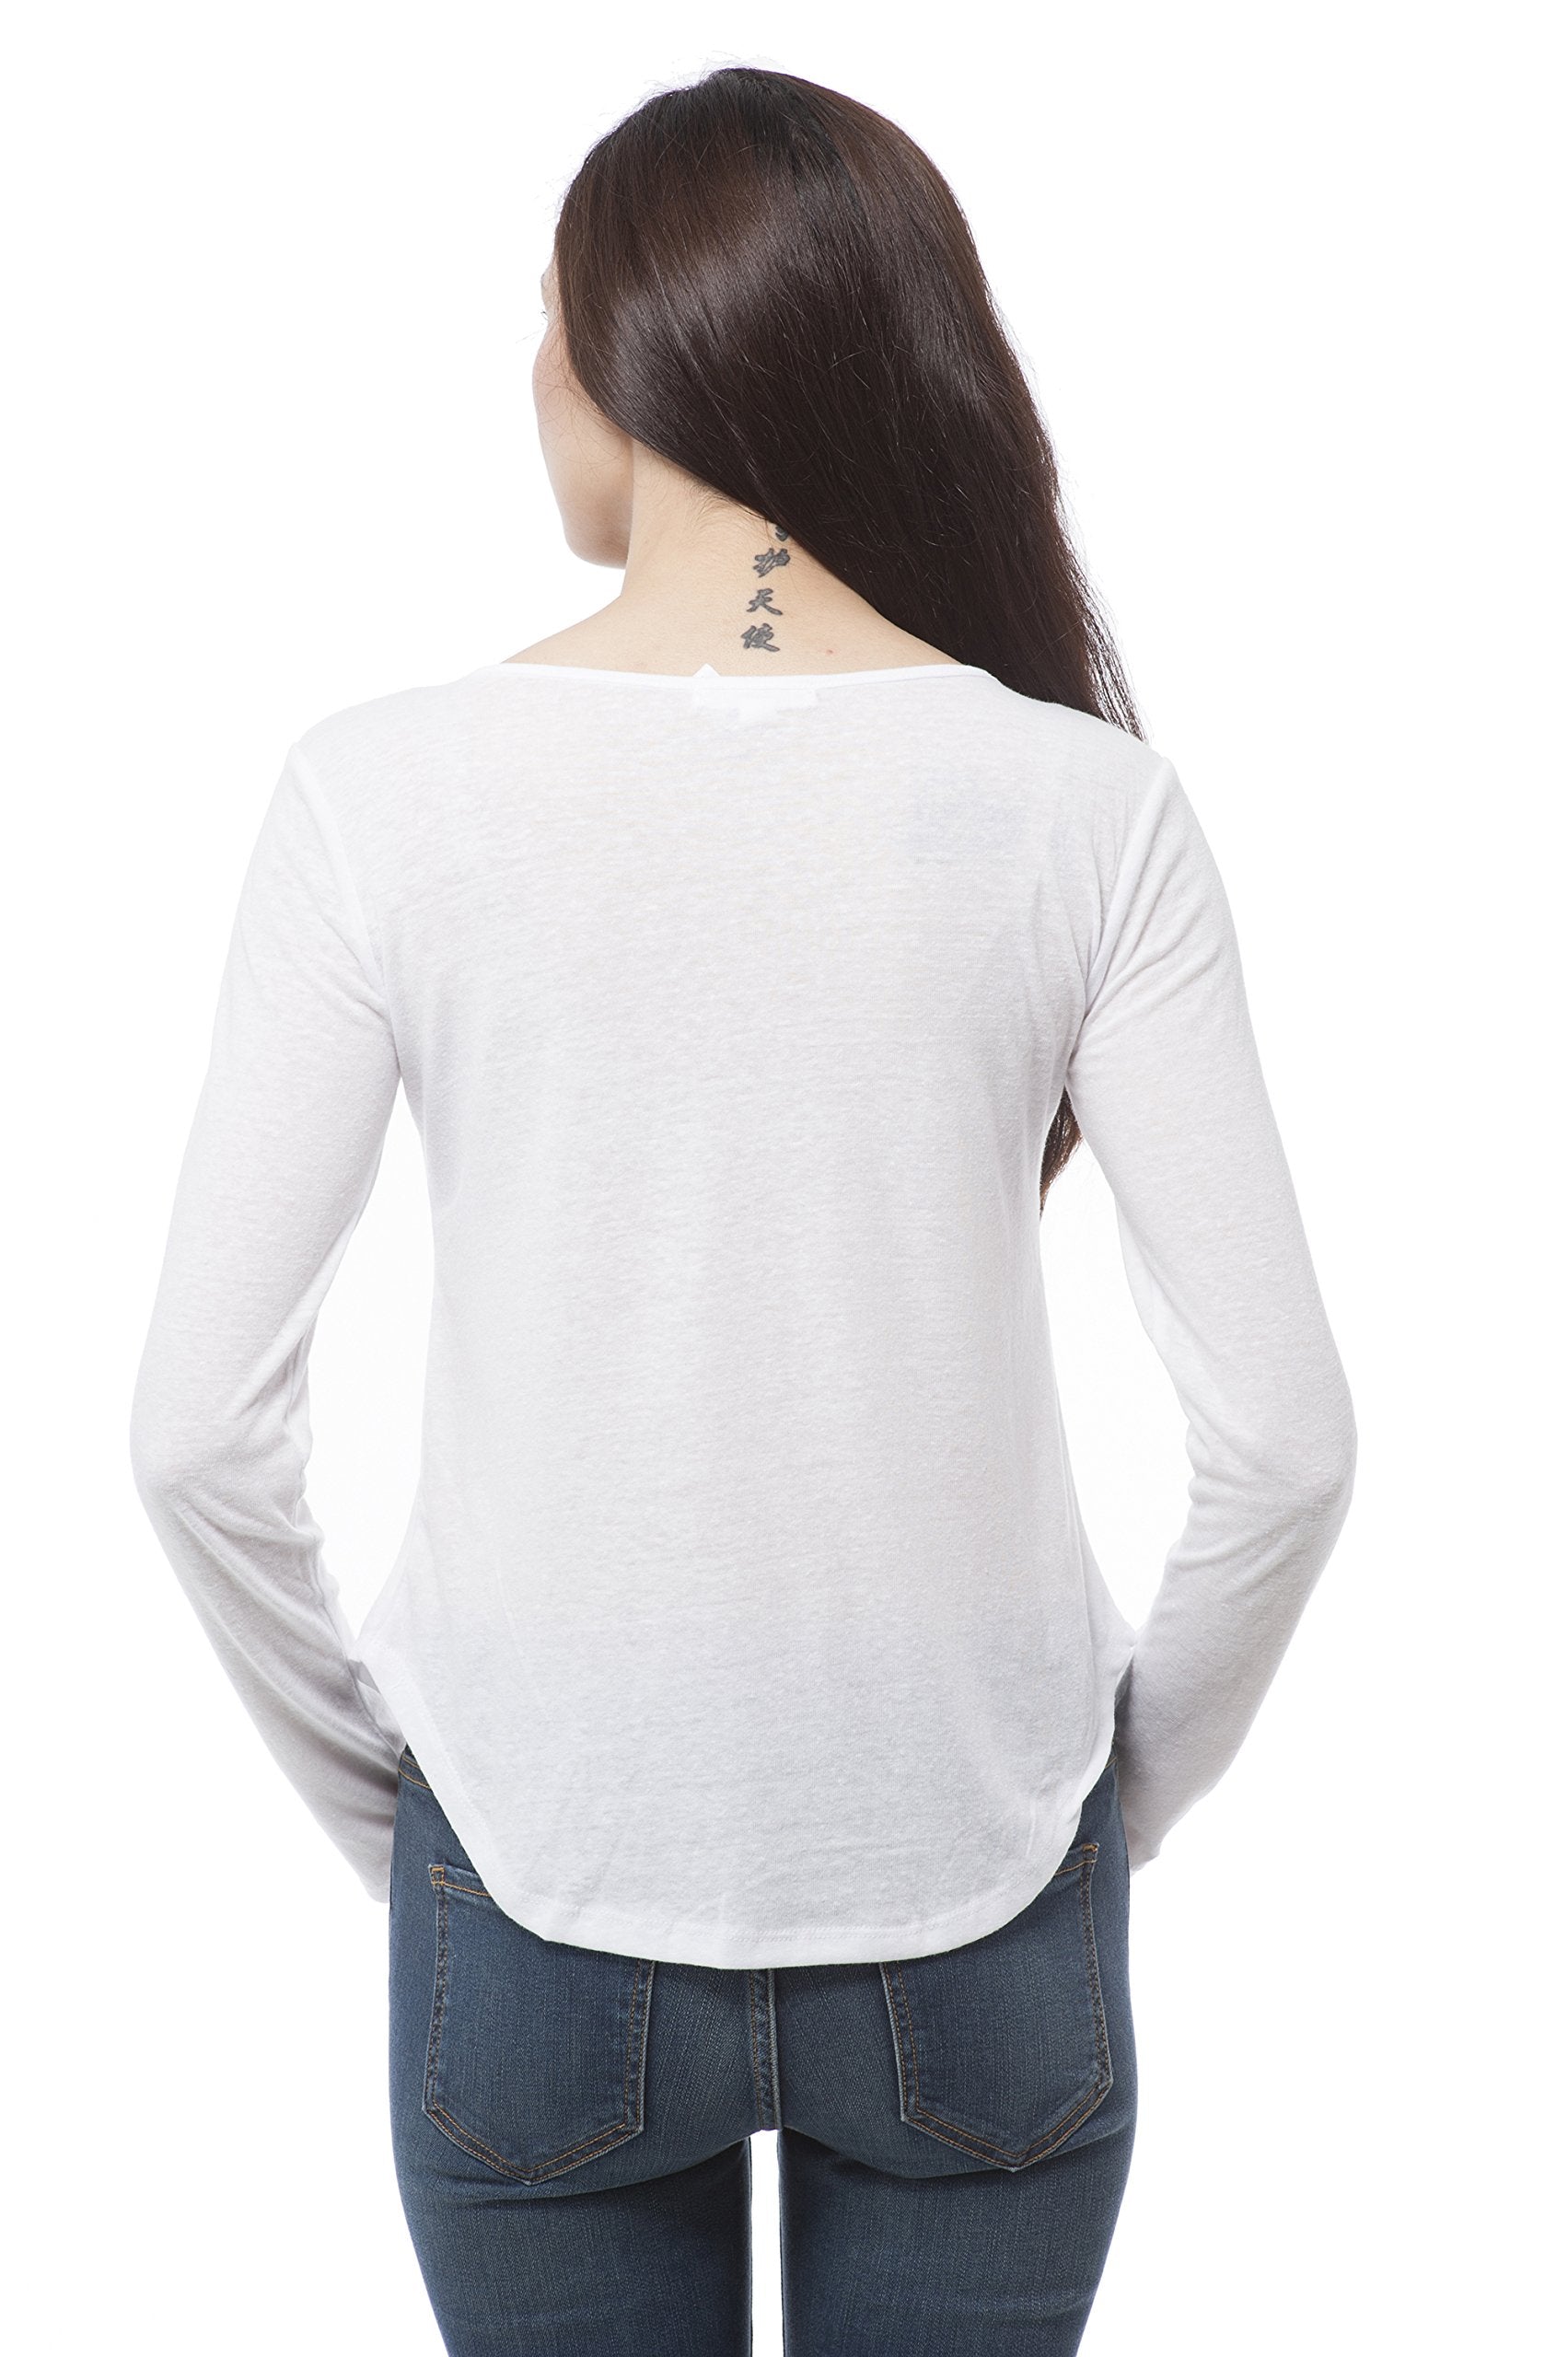 Hollywood Star Fashion Casual Plain Long Sleeve Scoop Neck Top